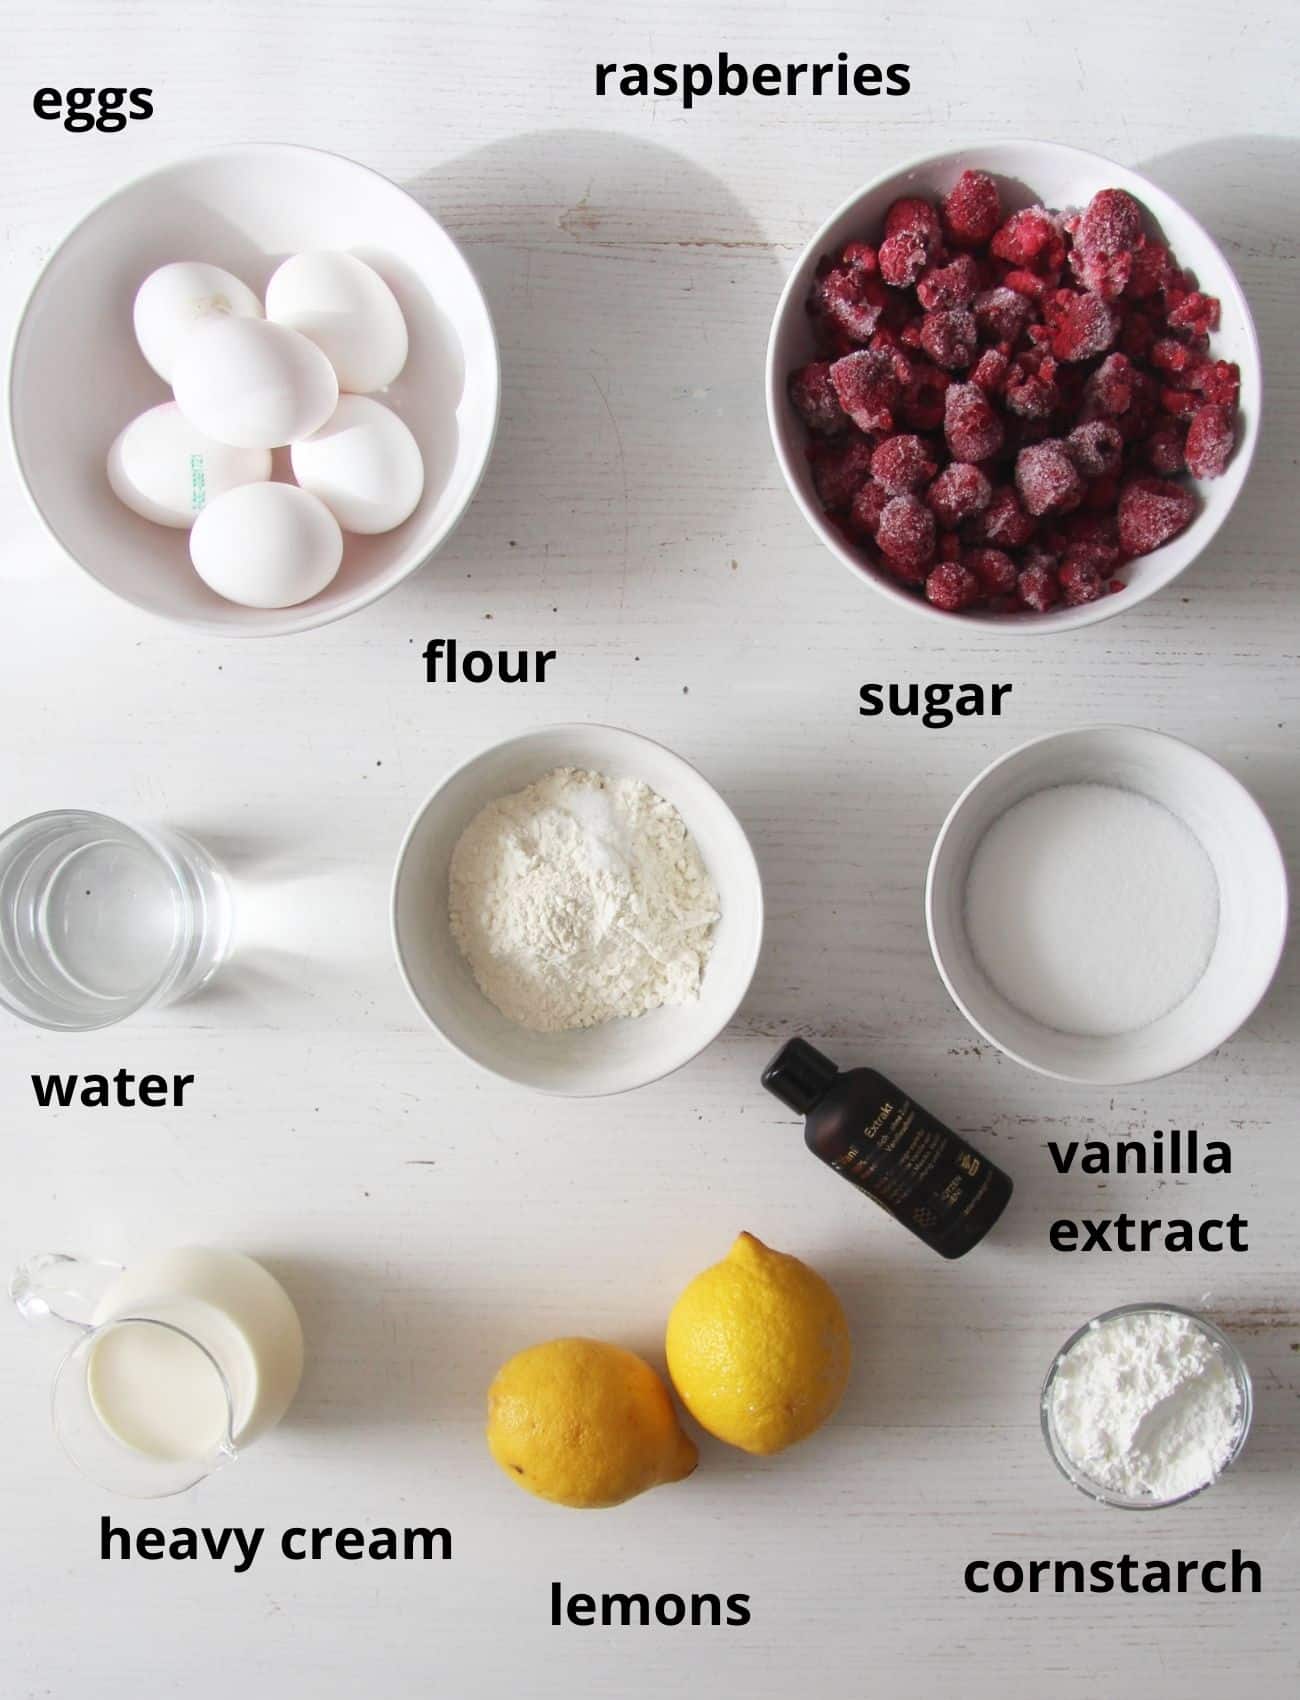 listed ingredients for cake with raspberries and lemon curd.